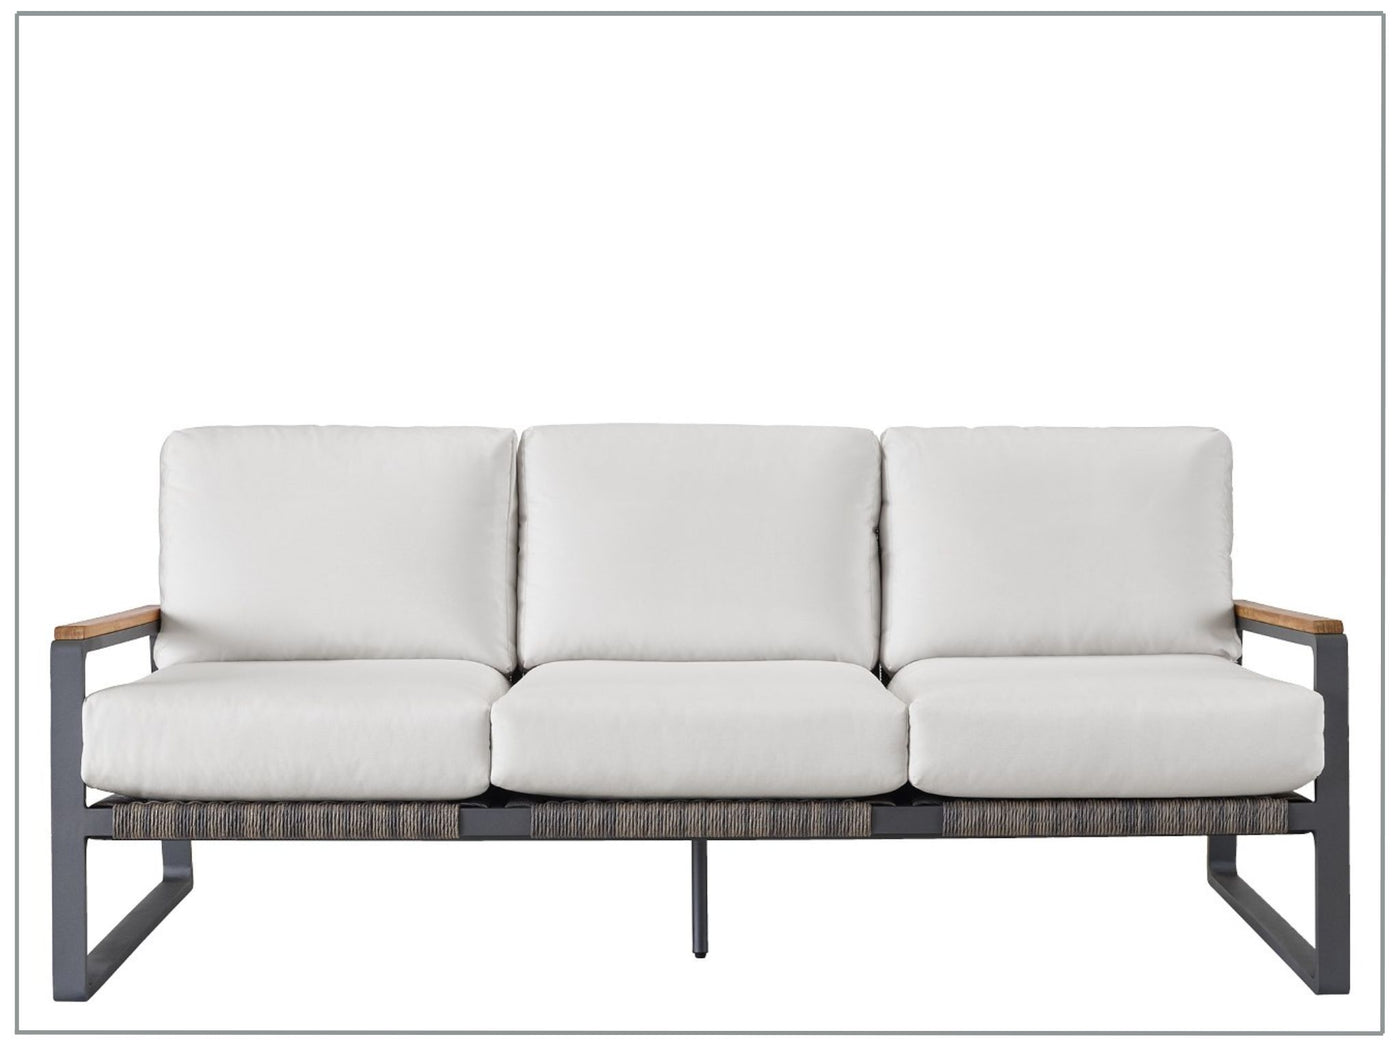 Coastal Living Outdoor San Clemente Sofa by Universal Furniture